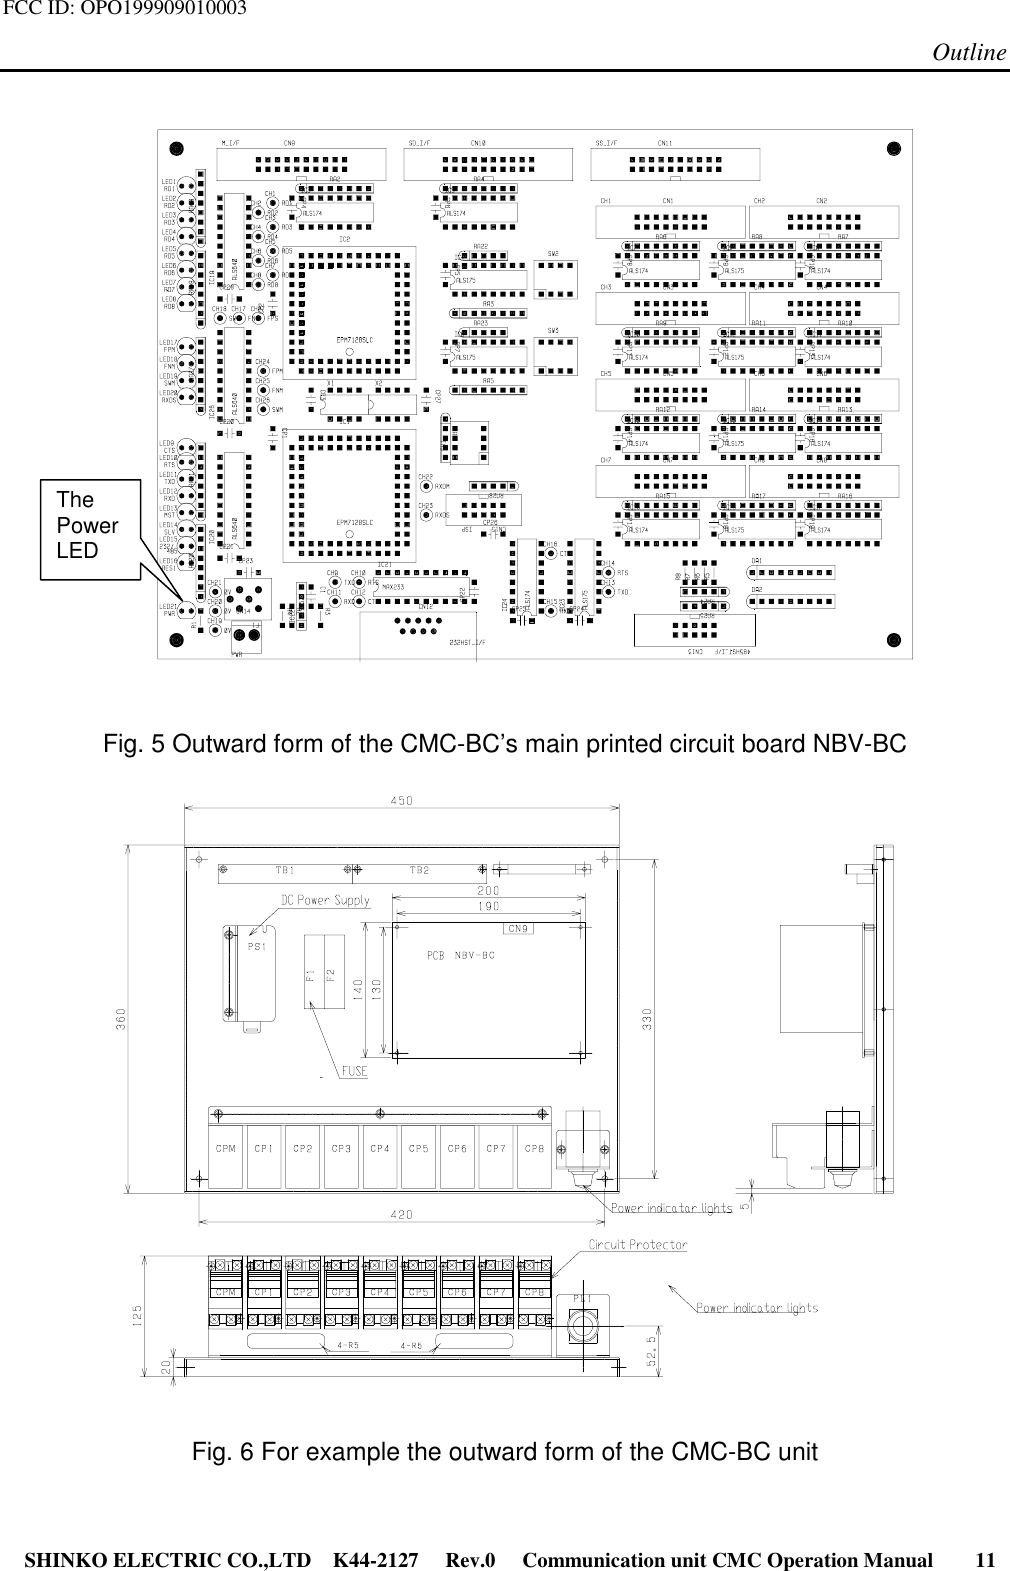 FCC ID: OPO199909010003Outline SHINKO ELECTRIC CO.,LTD K44-2127   Rev.0   Communication unit CMC Operation Manual     11Fig. 5 Outward form of the CMC-BC’s main printed circuit board NBV-BCFig. 6 For example the outward form of the CMC-BC unitThePowerLED